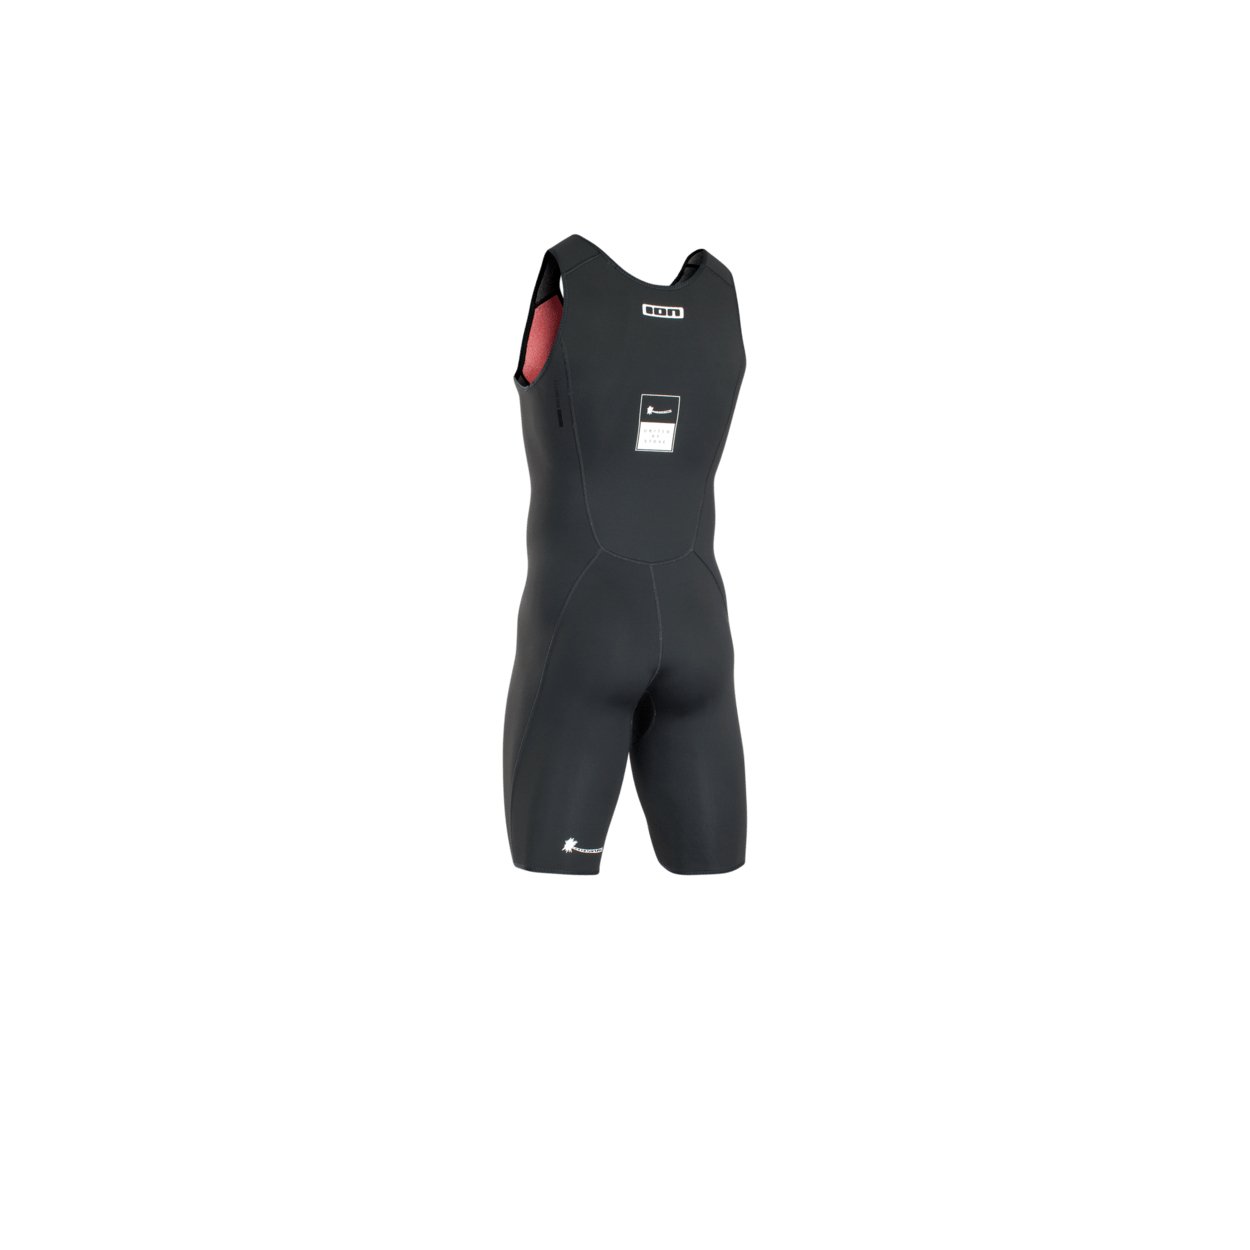 ION Monoshorty 2.0 2022 - Worthing Watersports - 9008415881192 - Wetsuits - ION Water